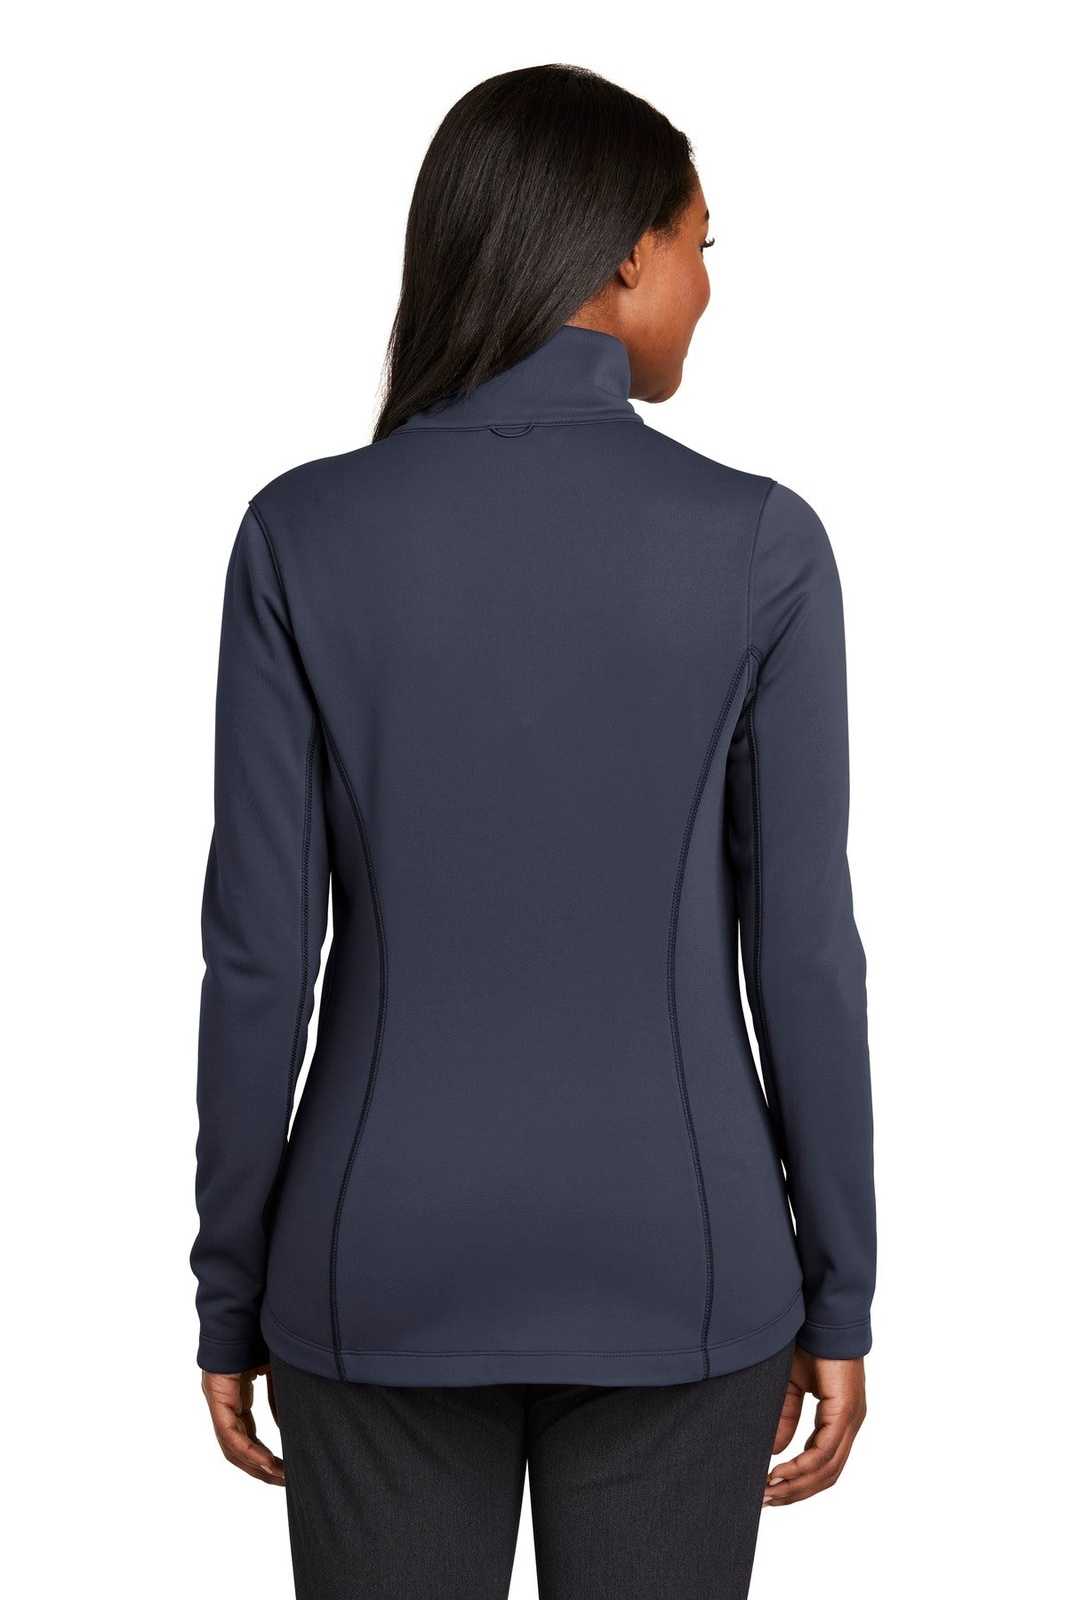 Port Authority L904 Ladies Collective Smooth Fleece Jacket - River Blue Navy - HIT a Double - 2